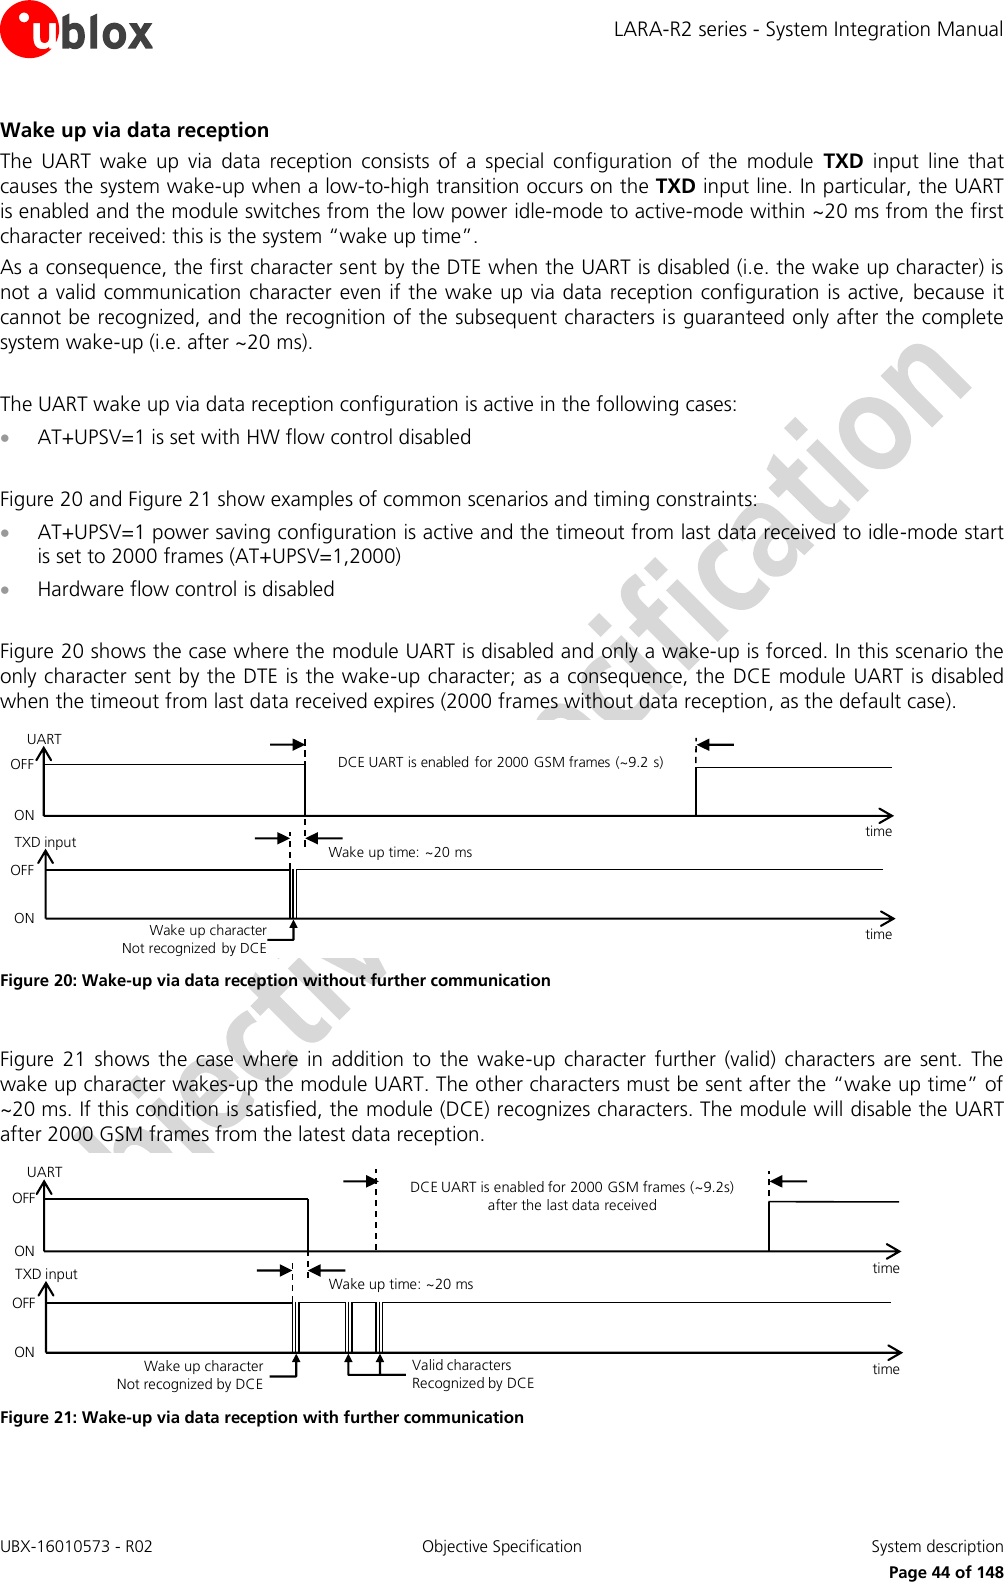 LARA-R2 series - System Integration Manual UBX-16010573 - R02  Objective Specification  System description     Page 44 of 148 Wake up via data reception The  UART  wake  up  via  data  reception  consists  of  a  special  configuration  of  the  module  TXD  input  line  that causes the system wake-up when a low-to-high transition occurs on the TXD input line. In particular, the UART is enabled and the module switches from the low power idle-mode to active-mode within ~20 ms from the first character received: this is the system “wake up time”. As a consequence, the first character sent by the DTE when the UART is disabled (i.e. the wake up character) is not a valid communication character  even if the wake up via data reception configuration is active,  because it cannot be recognized, and the recognition of the subsequent characters is guaranteed only after the complete system wake-up (i.e. after ~20 ms).  The UART wake up via data reception configuration is active in the following cases:  AT+UPSV=1 is set with HW flow control disabled  Figure 20 and Figure 21 show examples of common scenarios and timing constraints:  AT+UPSV=1 power saving configuration is active and the timeout from last data received to idle-mode start is set to 2000 frames (AT+UPSV=1,2000)  Hardware flow control is disabled  Figure 20 shows the case where the module UART is disabled and only a wake-up is forced. In this scenario the only character sent by the DTE is the wake-up character; as a consequence, the  DCE module UART is disabled when the timeout from last data received expires (2000 frames without data reception, as the default case). Wake up character        Not recognized by DCEOFFONDCE UART is enabled for 2000 GSM frames (~9.2 s)time Wake up time: ~20 mstime TXD inputUARTOFFON Figure 20: Wake-up via data reception without further communication  Figure  21  shows  the  case  where  in  addition  to  the  wake-up  character  further  (valid)  characters  are  sent.  The wake up character wakes-up the module UART. The other characters must be sent after the “wake up time” of ~20 ms. If this condition is satisfied, the module (DCE) recognizes characters. The module will disable the UART after 2000 GSM frames from the latest data reception. Wake up character        Not recognized by DCEValid characters          Recognized by DCEDCE UART is enabled for 2000 GSM frames (~9.2s) after the last data receivedtime Wake up time: ~20 mstime OFFONTXD inputUARTOFFON Figure 21: Wake-up via data reception with further communication  